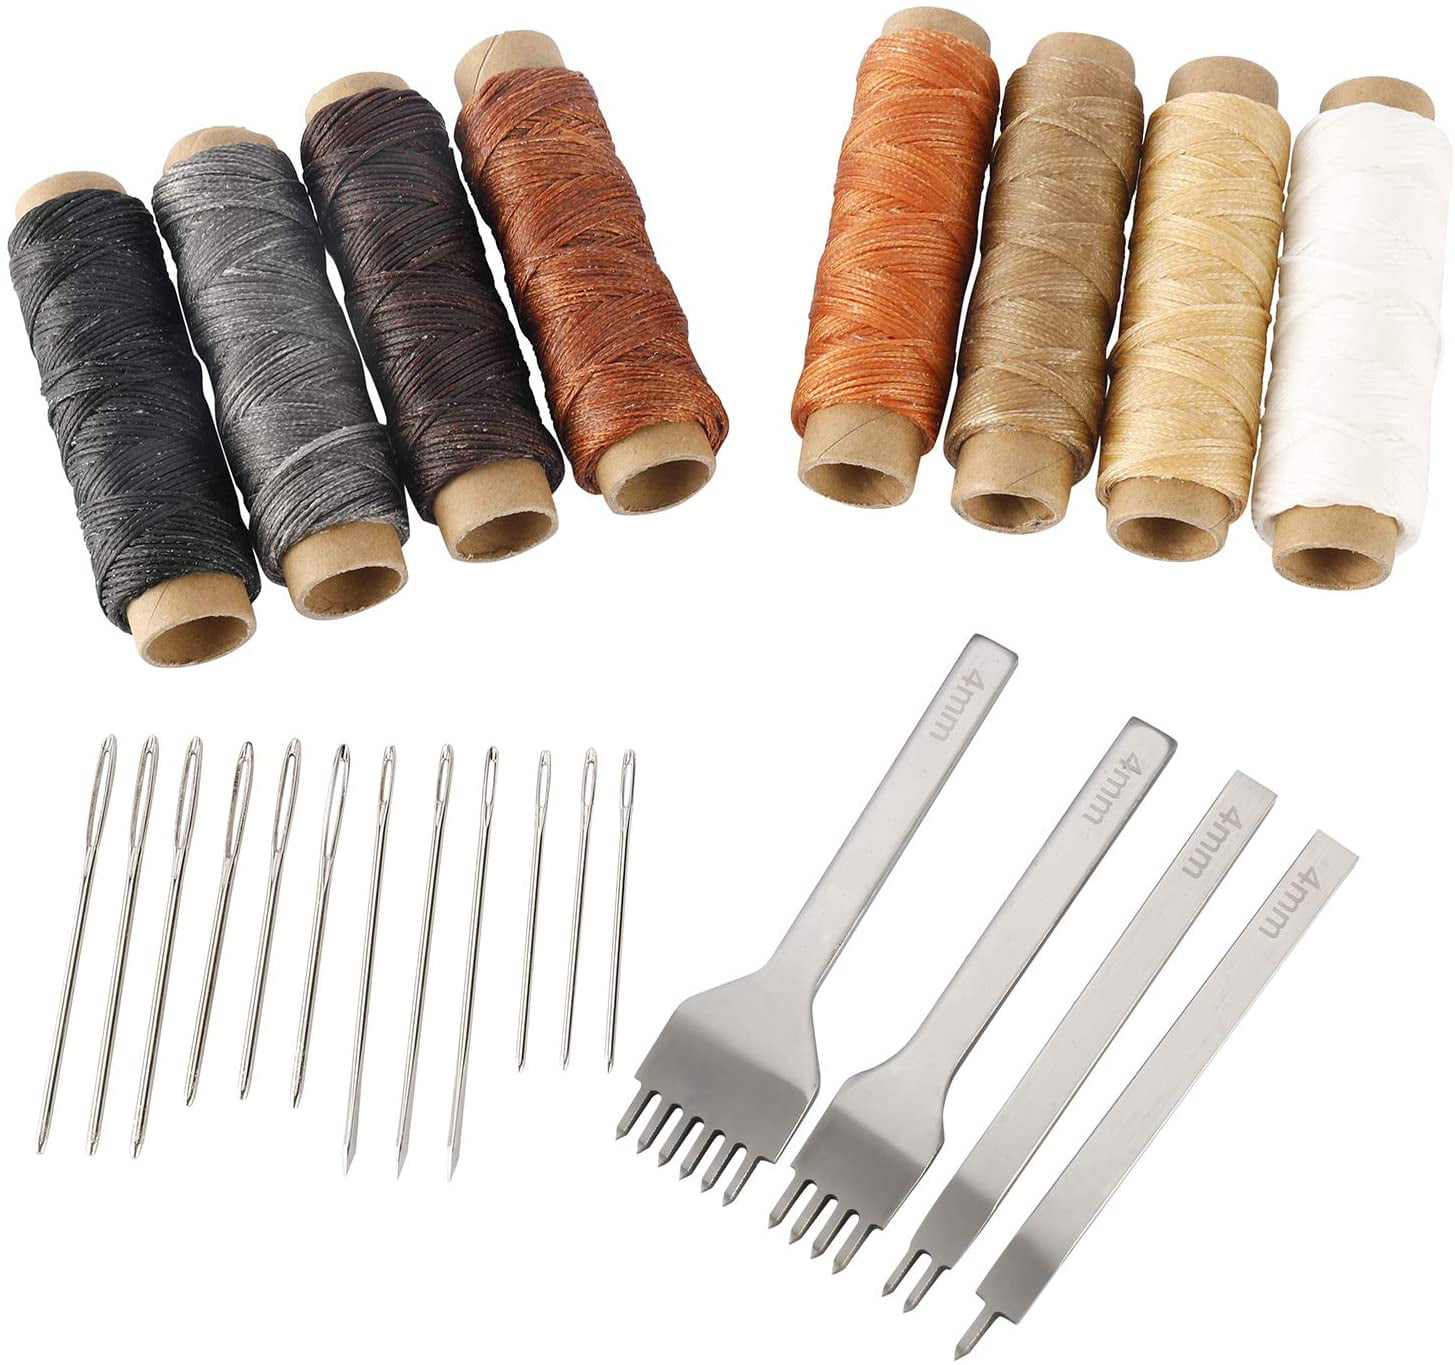 24 Pcs Leather Sewing Tools Stitching Pouch Kit with 4mm Prong Punch Stitching Chisel Waxed Thread and Large-Eye Stitching Needles for Beginner Leather Sewing Working Crafting Projects